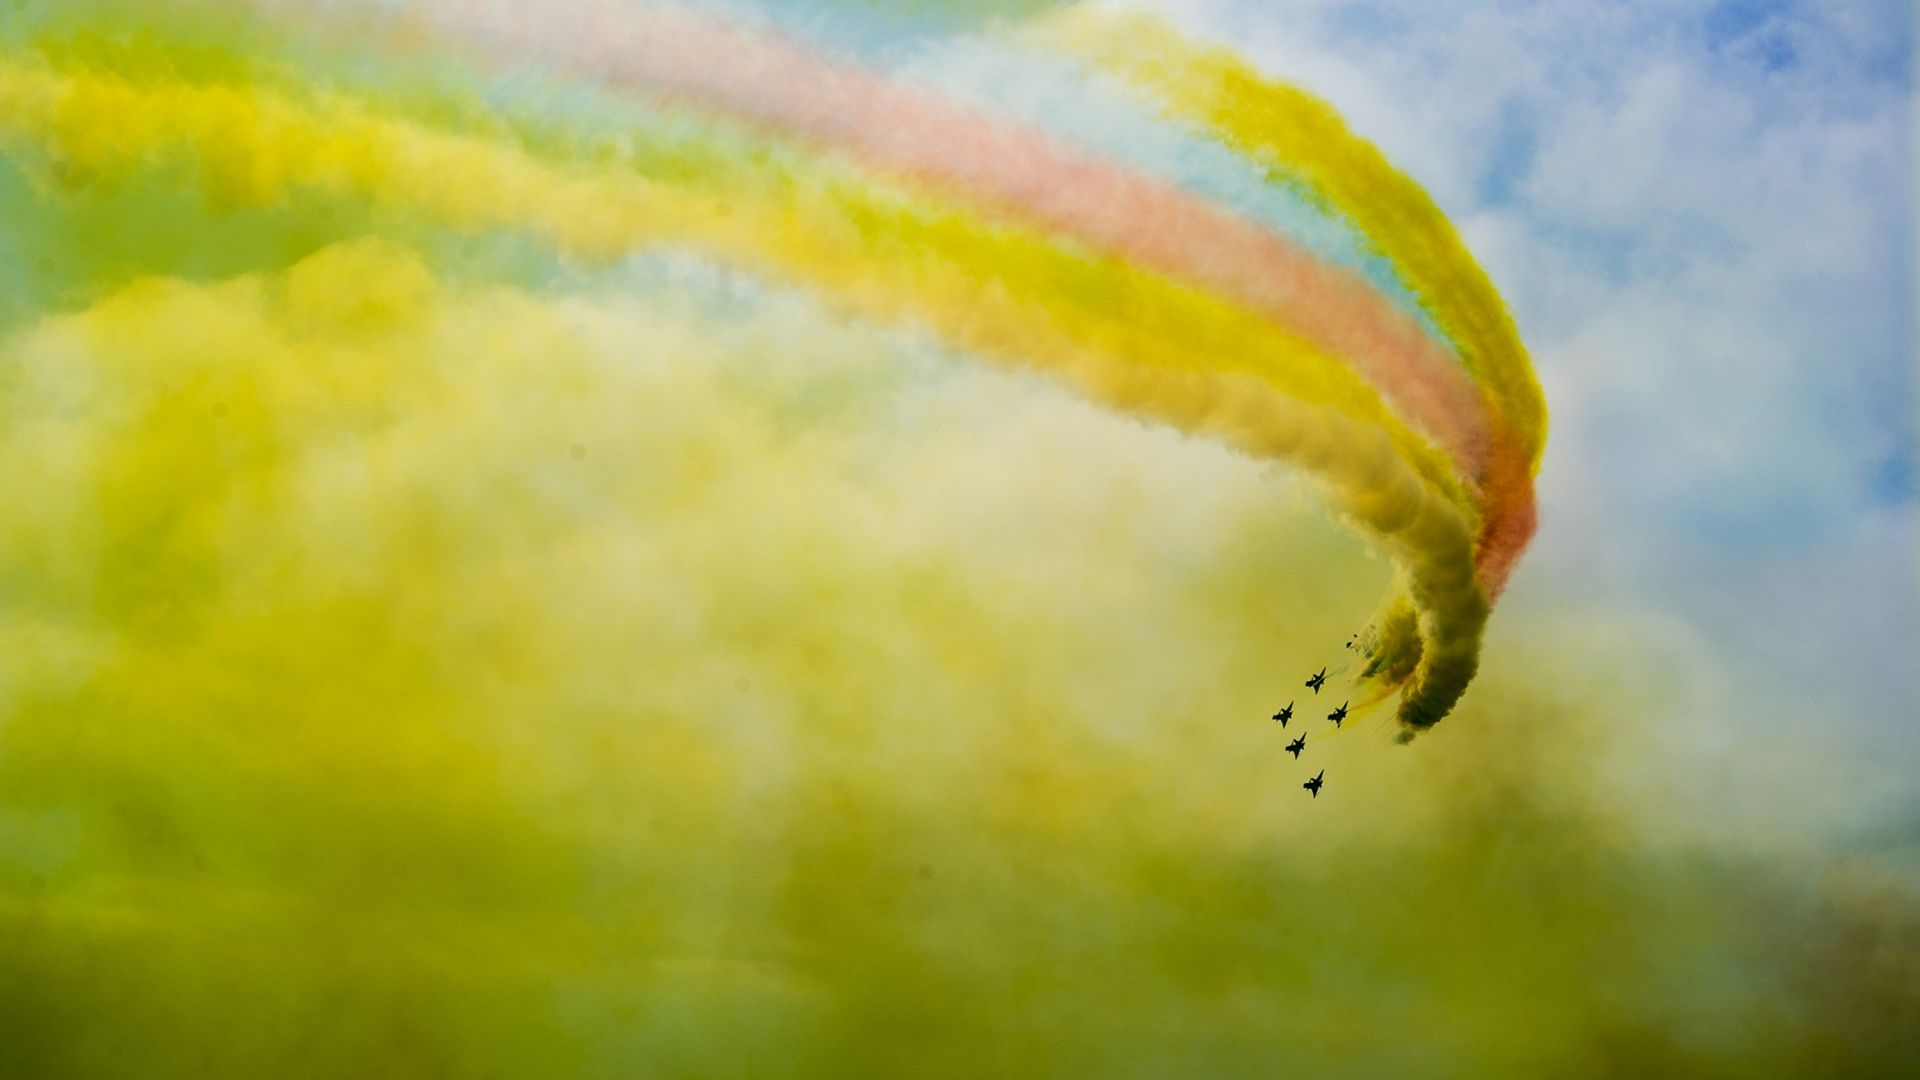 Wallpaper Aircraft, airplane, airshow, colorful clouds